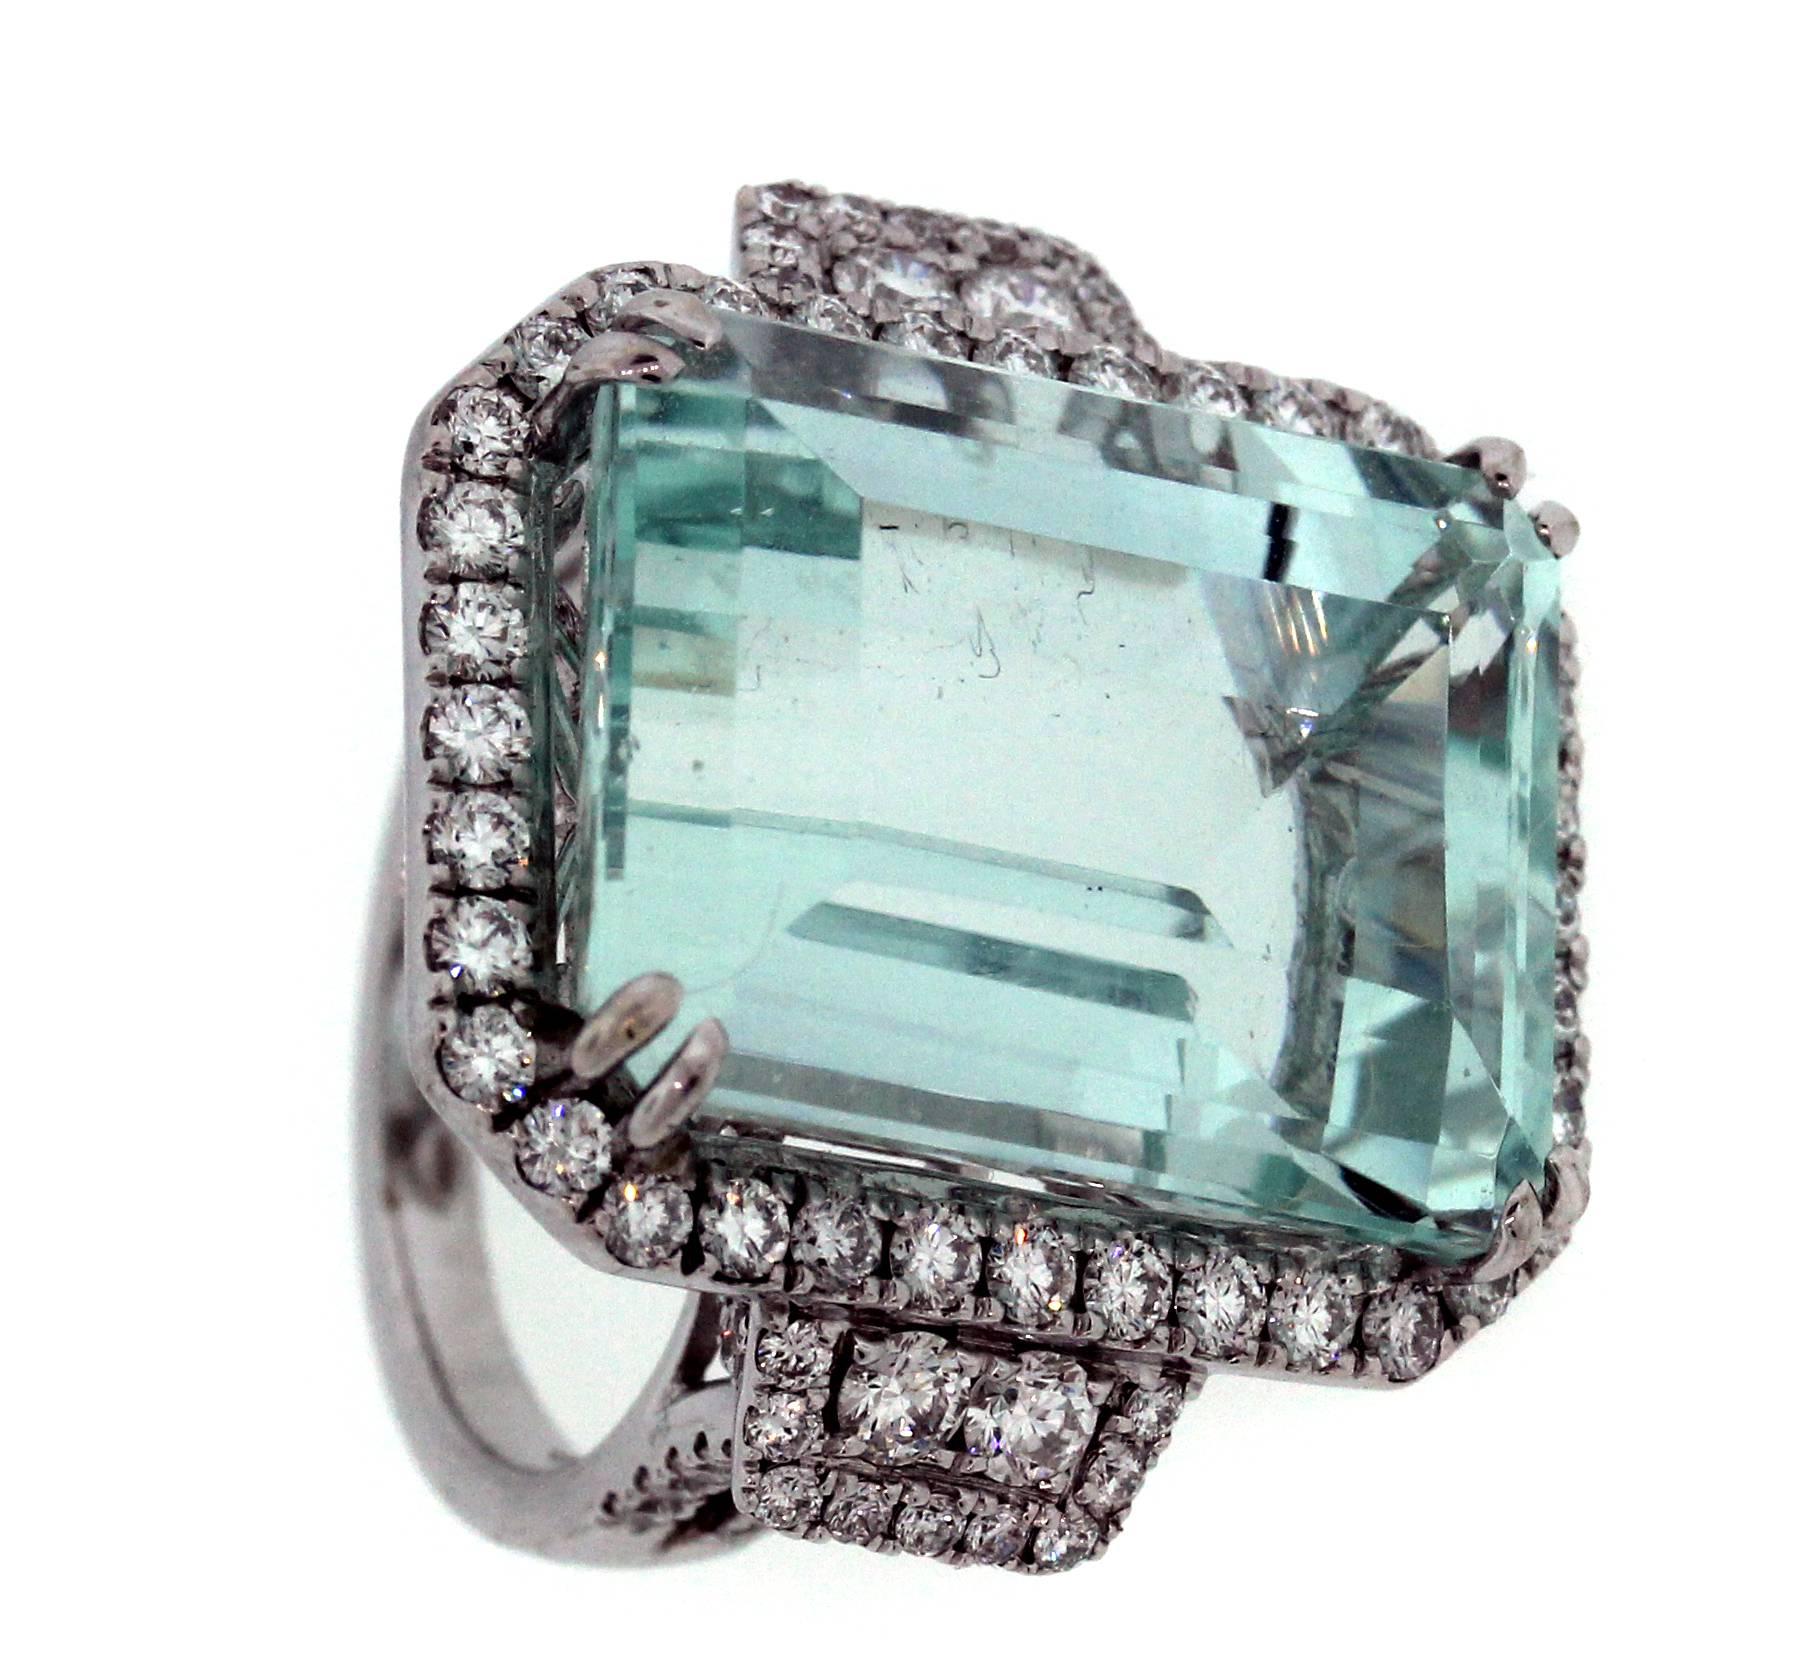 18K White Gold Ring with Aquamarine center and Diamonds

23.10 carat center Aquamarine, Emerald Cut, 18mm x 13mm. Stone has slight window, but color is truly incredible. 

2.13 carat G Color, VS Clarity Diamonds

Currently size 5.75. Sizable.